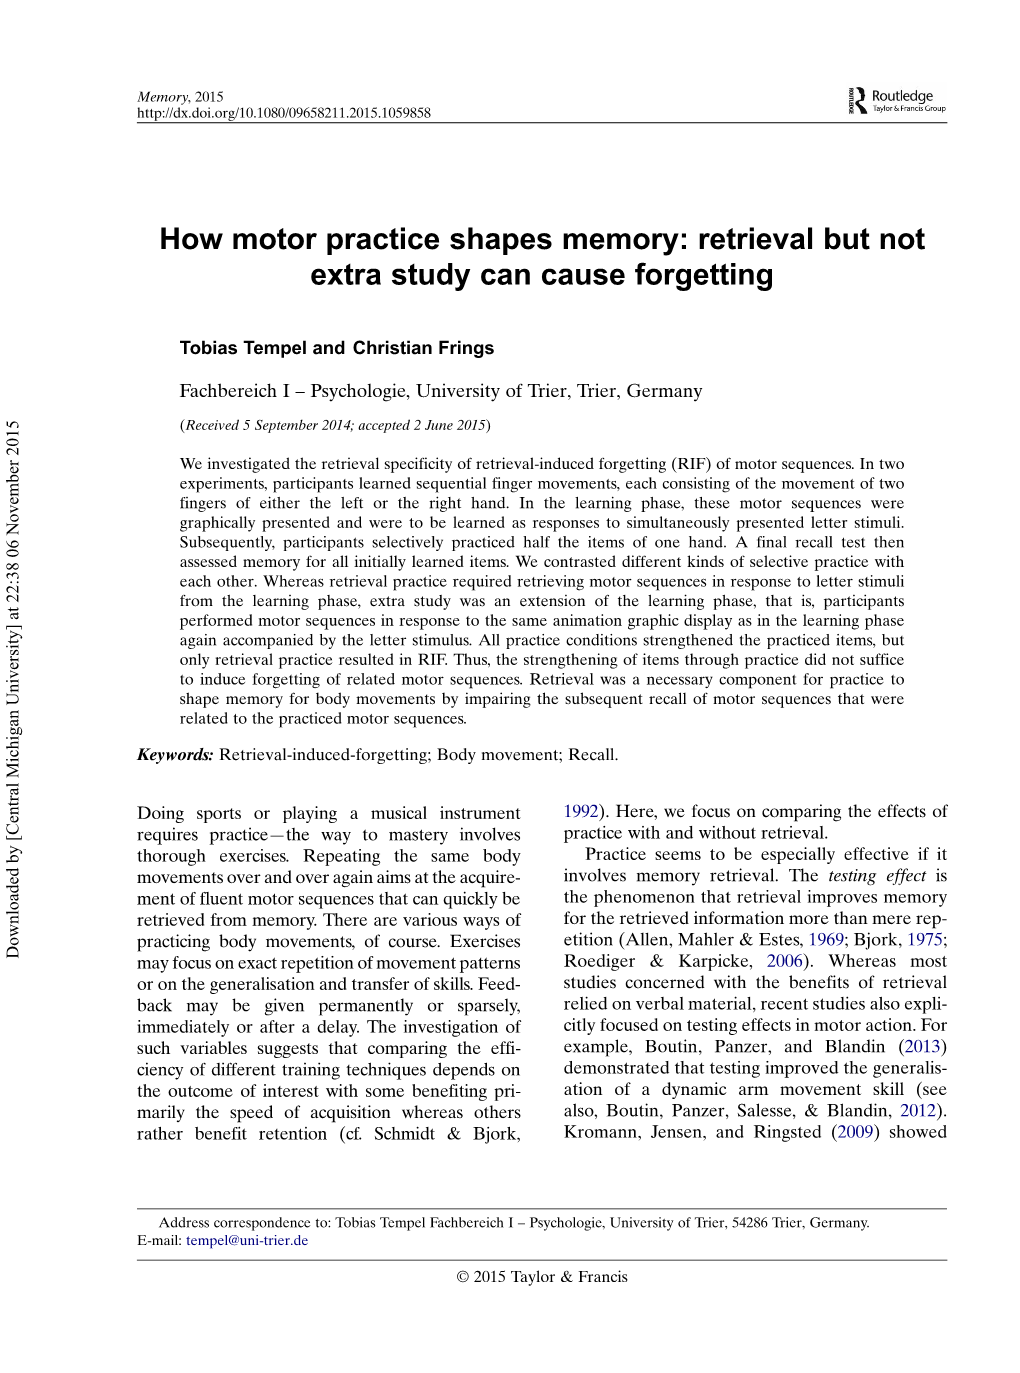 How Motor Practice Shapes Memory: Retrieval but Not Extra Study Can Cause Forgetting